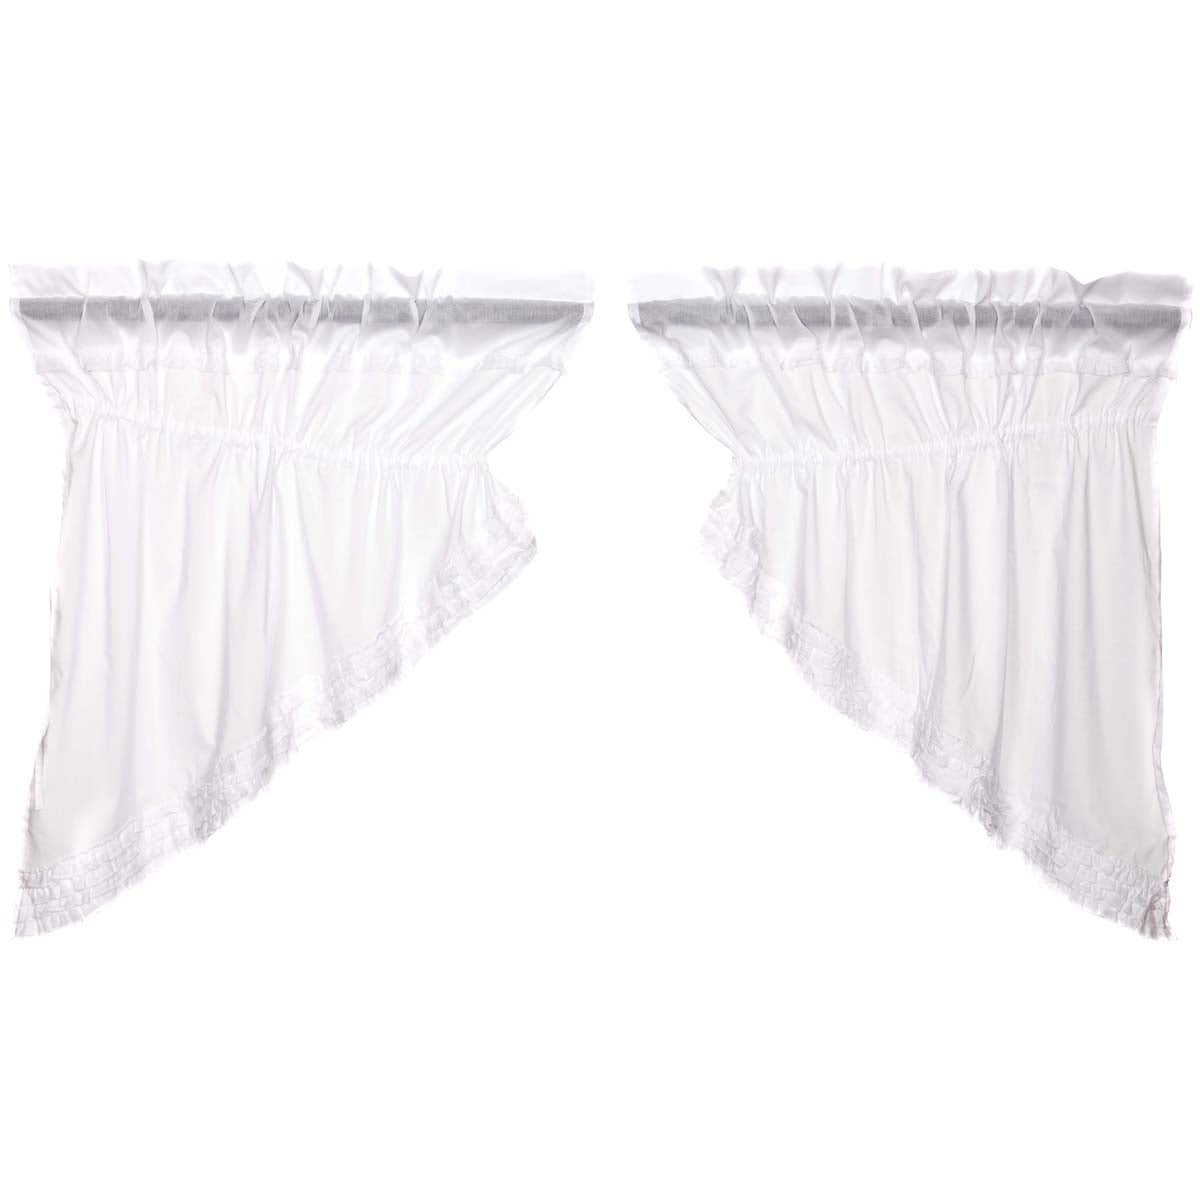 April & Olive White Ruffled Sheer Prairie Swag Set of 2 36x36x18 By VHC Brands